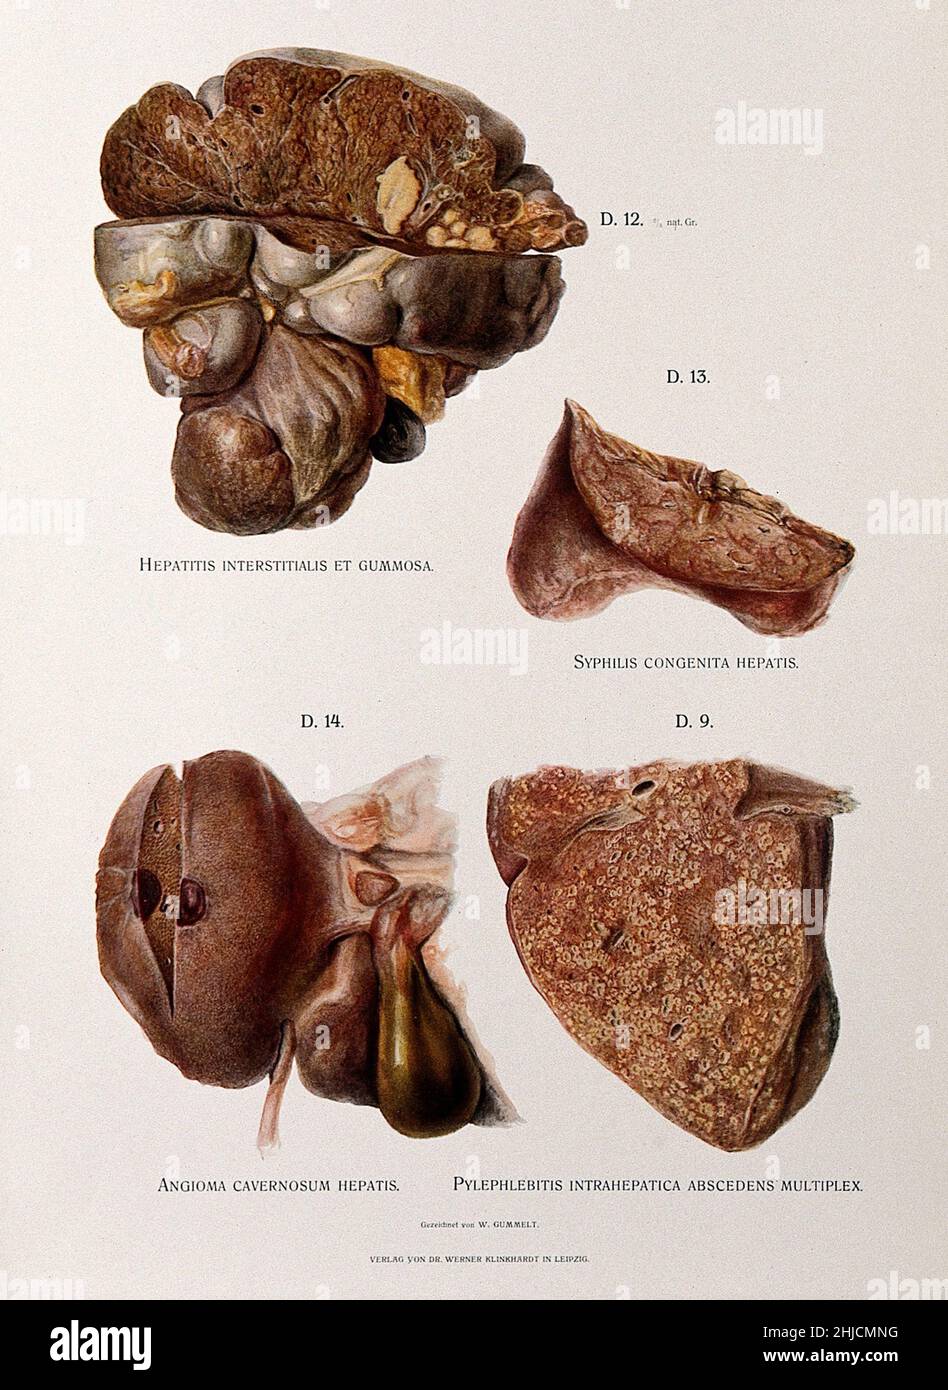 Chromolithograph illustrating liver disease in dissected specimens caused by hepatitis (top left), congenital syphilis (top right), angioma cavernosum hepatitis (bottom left), and pylephlebitis intrahepatica abscendens multiplex (bottom right). The plates were painted from hospital cases immediately after death. By W. Gummelt, 1897. Stock Photo